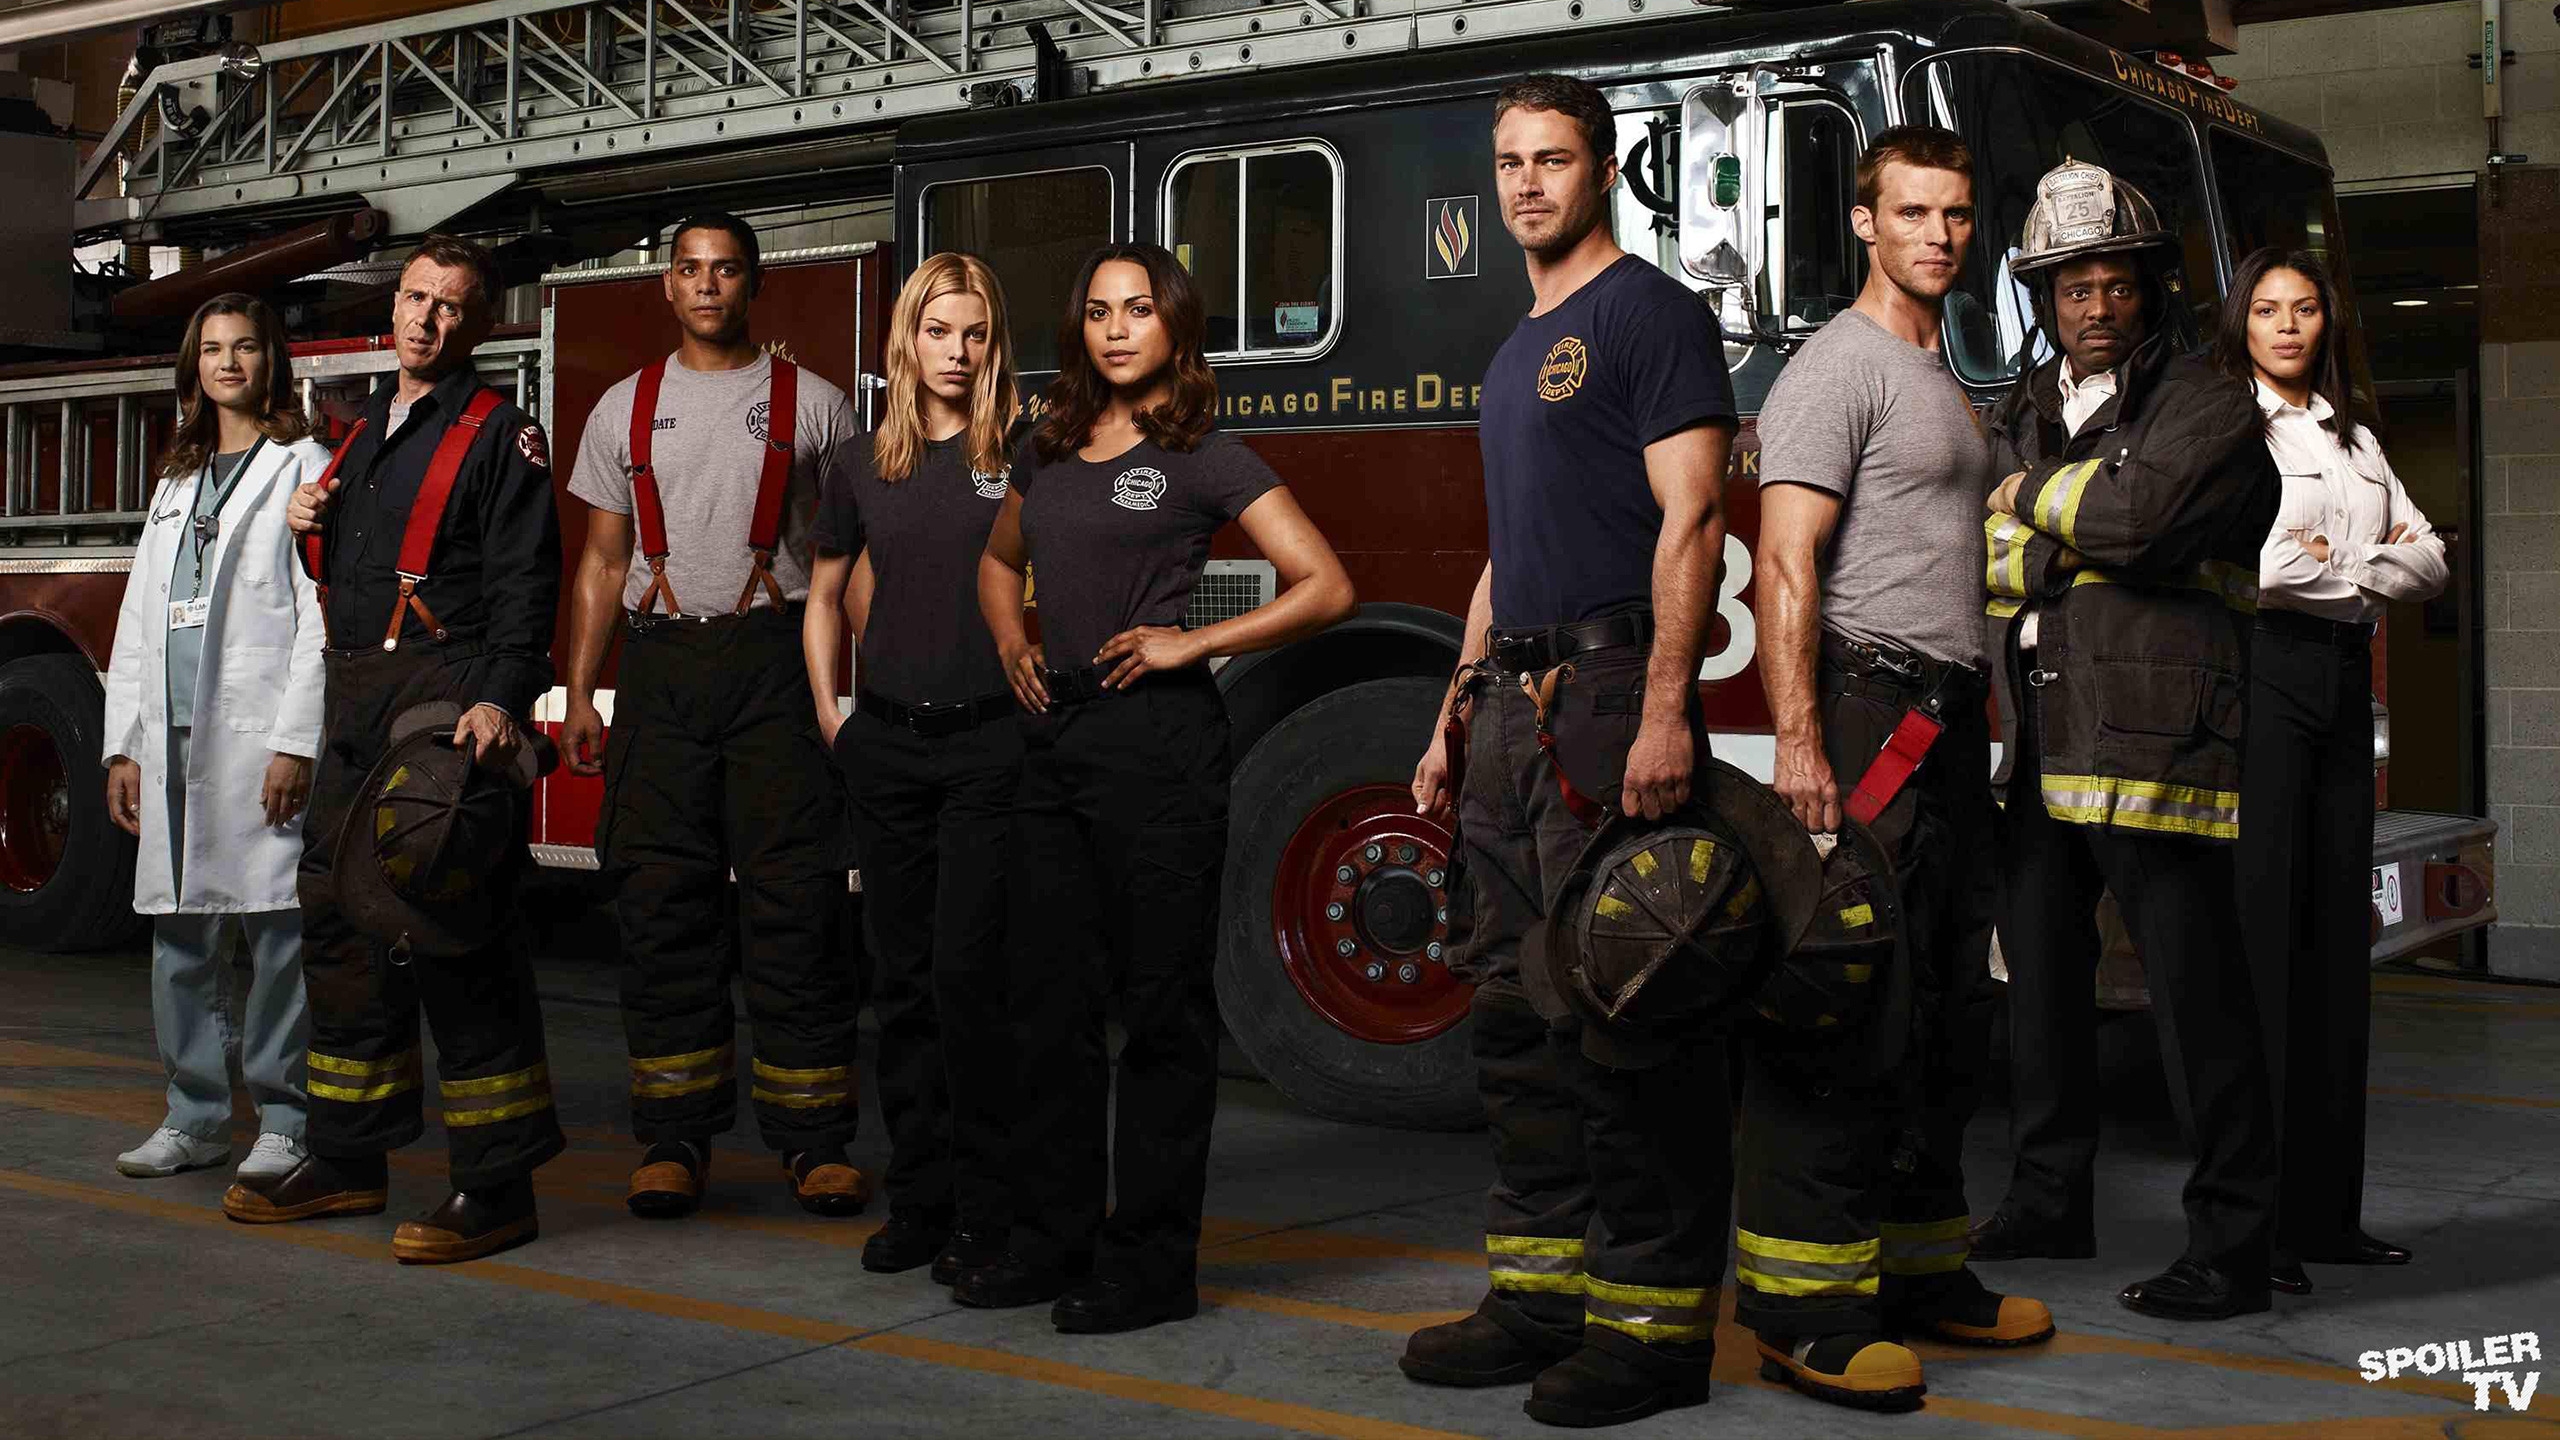 Chicago Fire Tv Show for 2560x1440 HDTV resolution